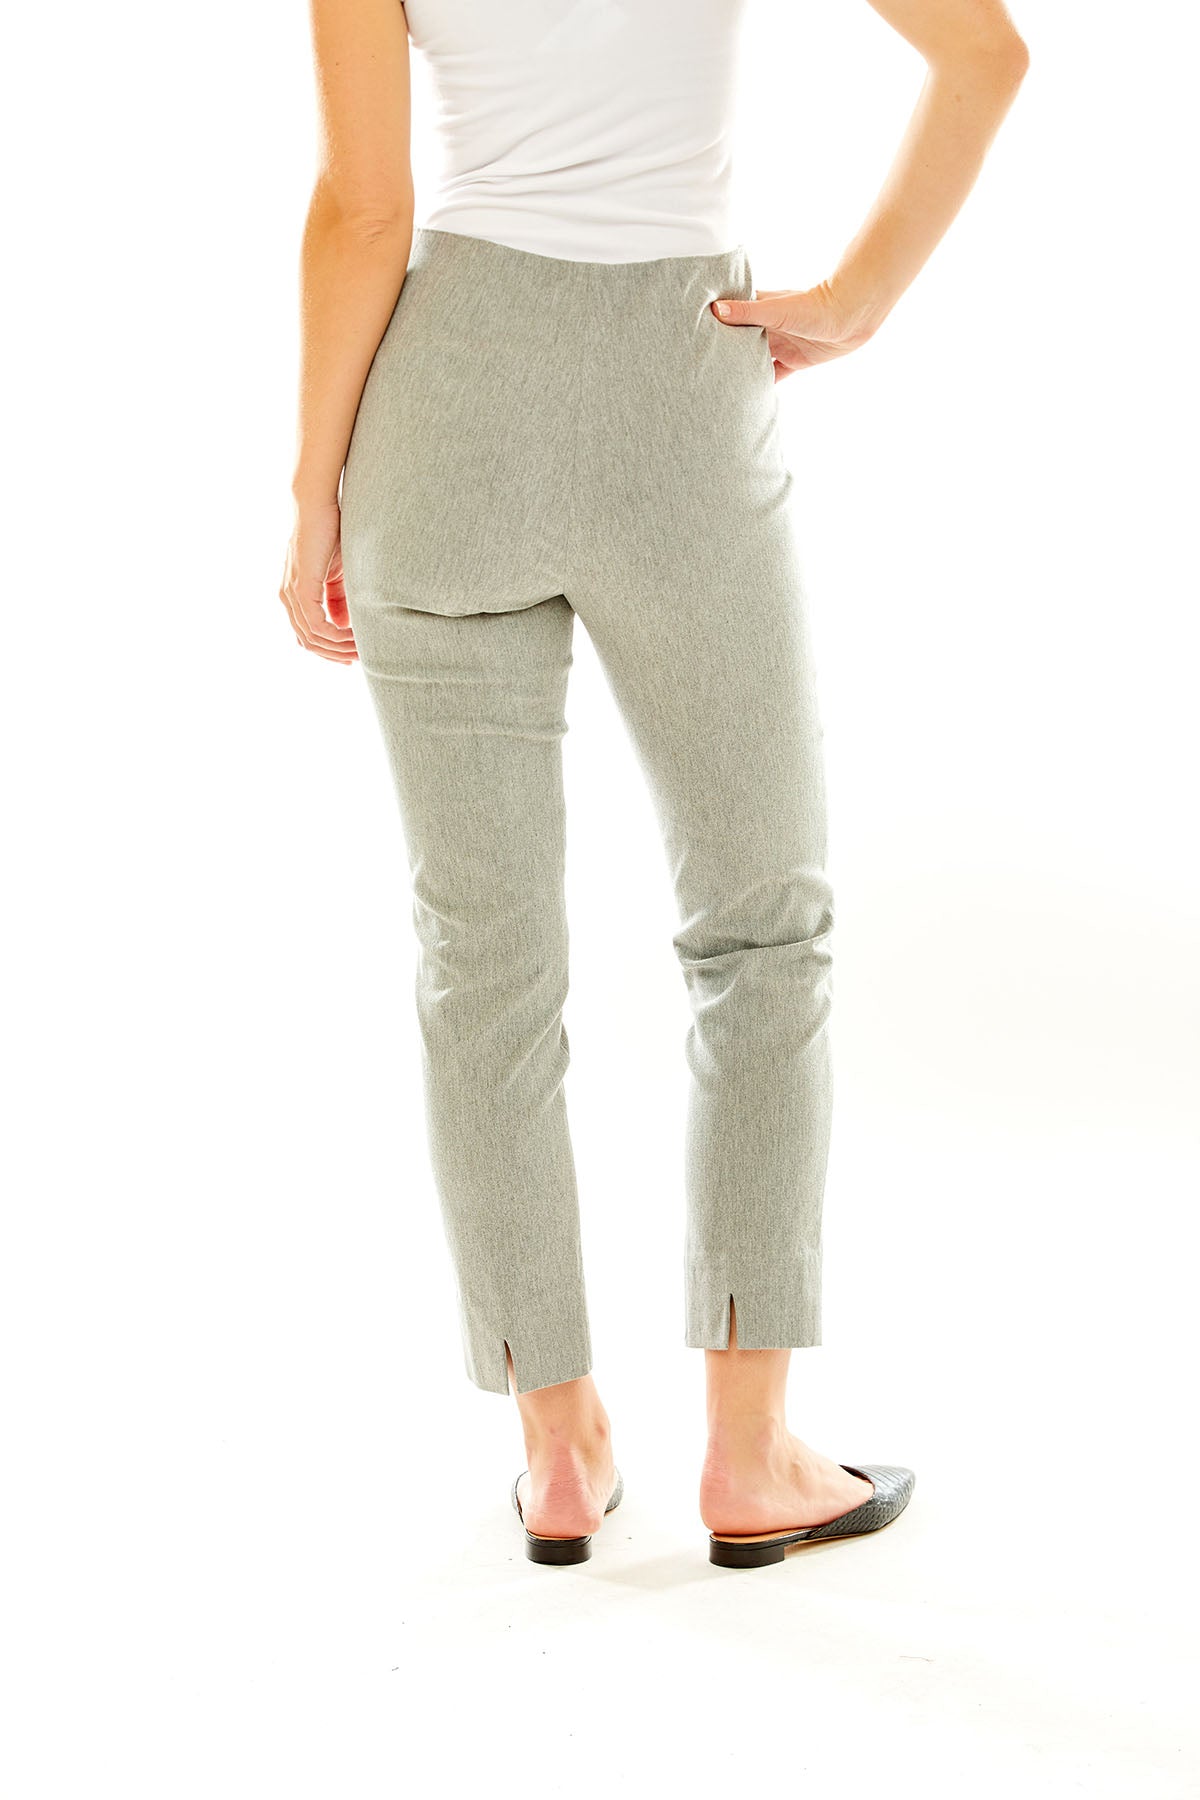 The Sara Campbell Flannel Sheri Pant in Light Grey